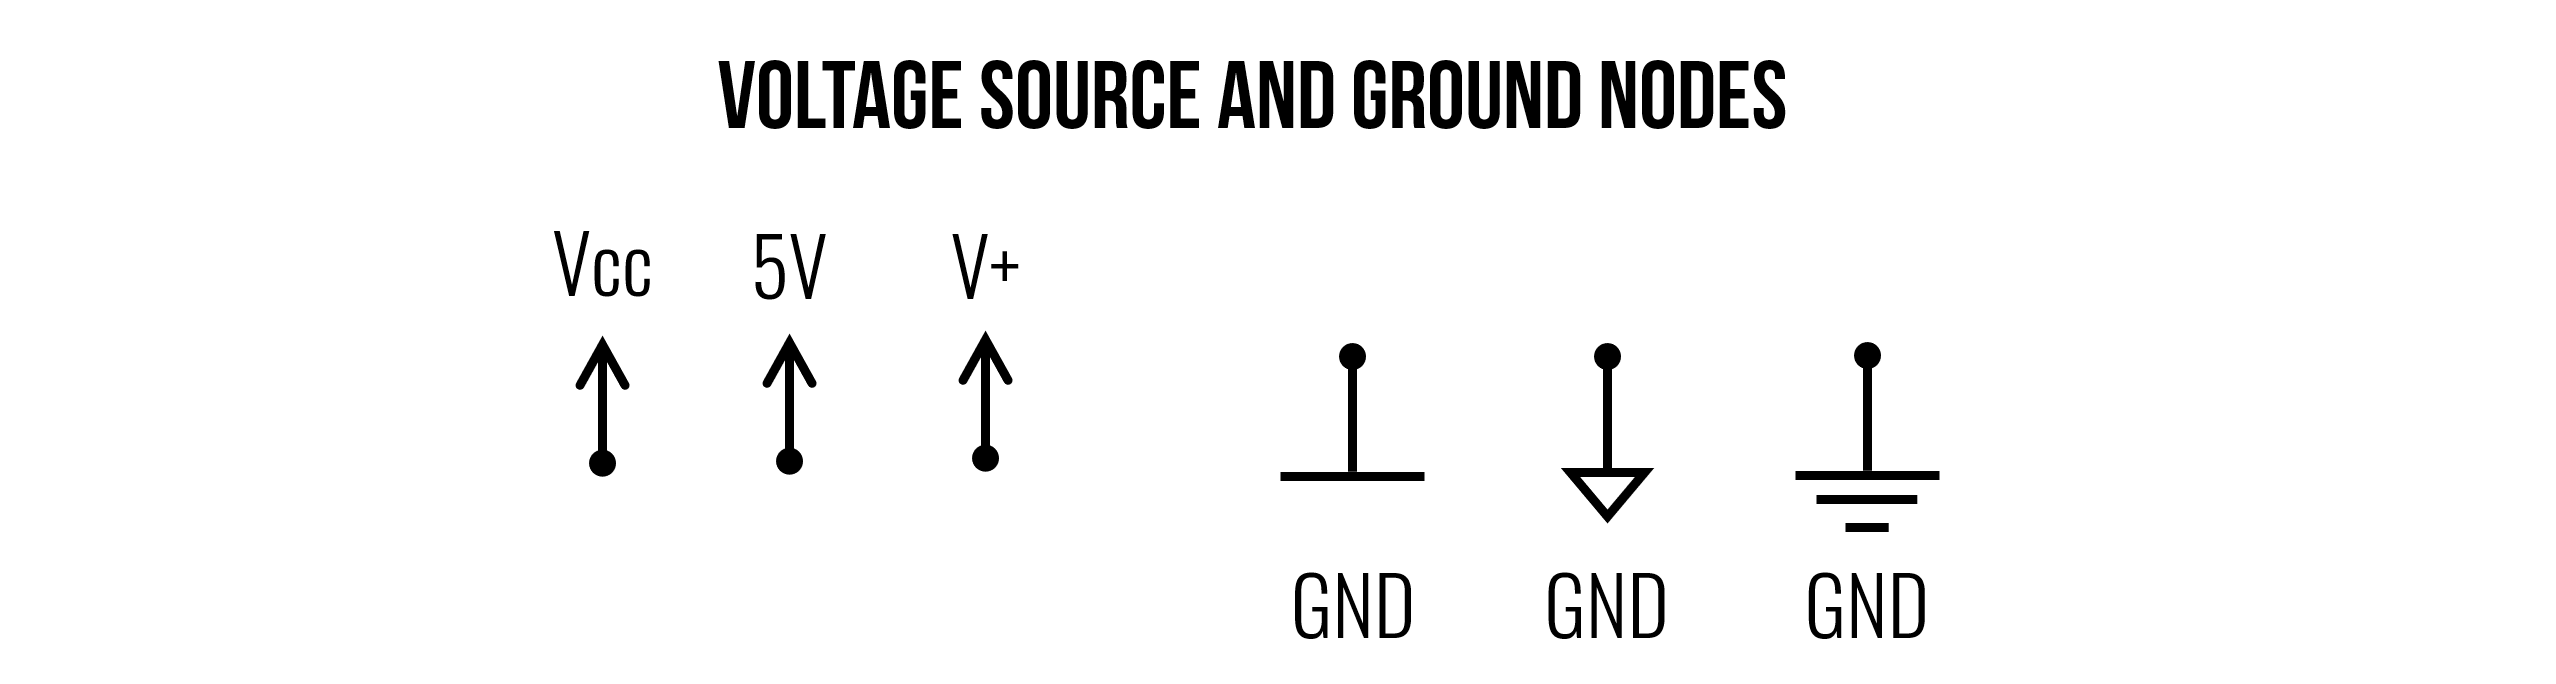 Shows examples of positive voltage sources (upward arrows) and ground nodes (downward pointed triangles)